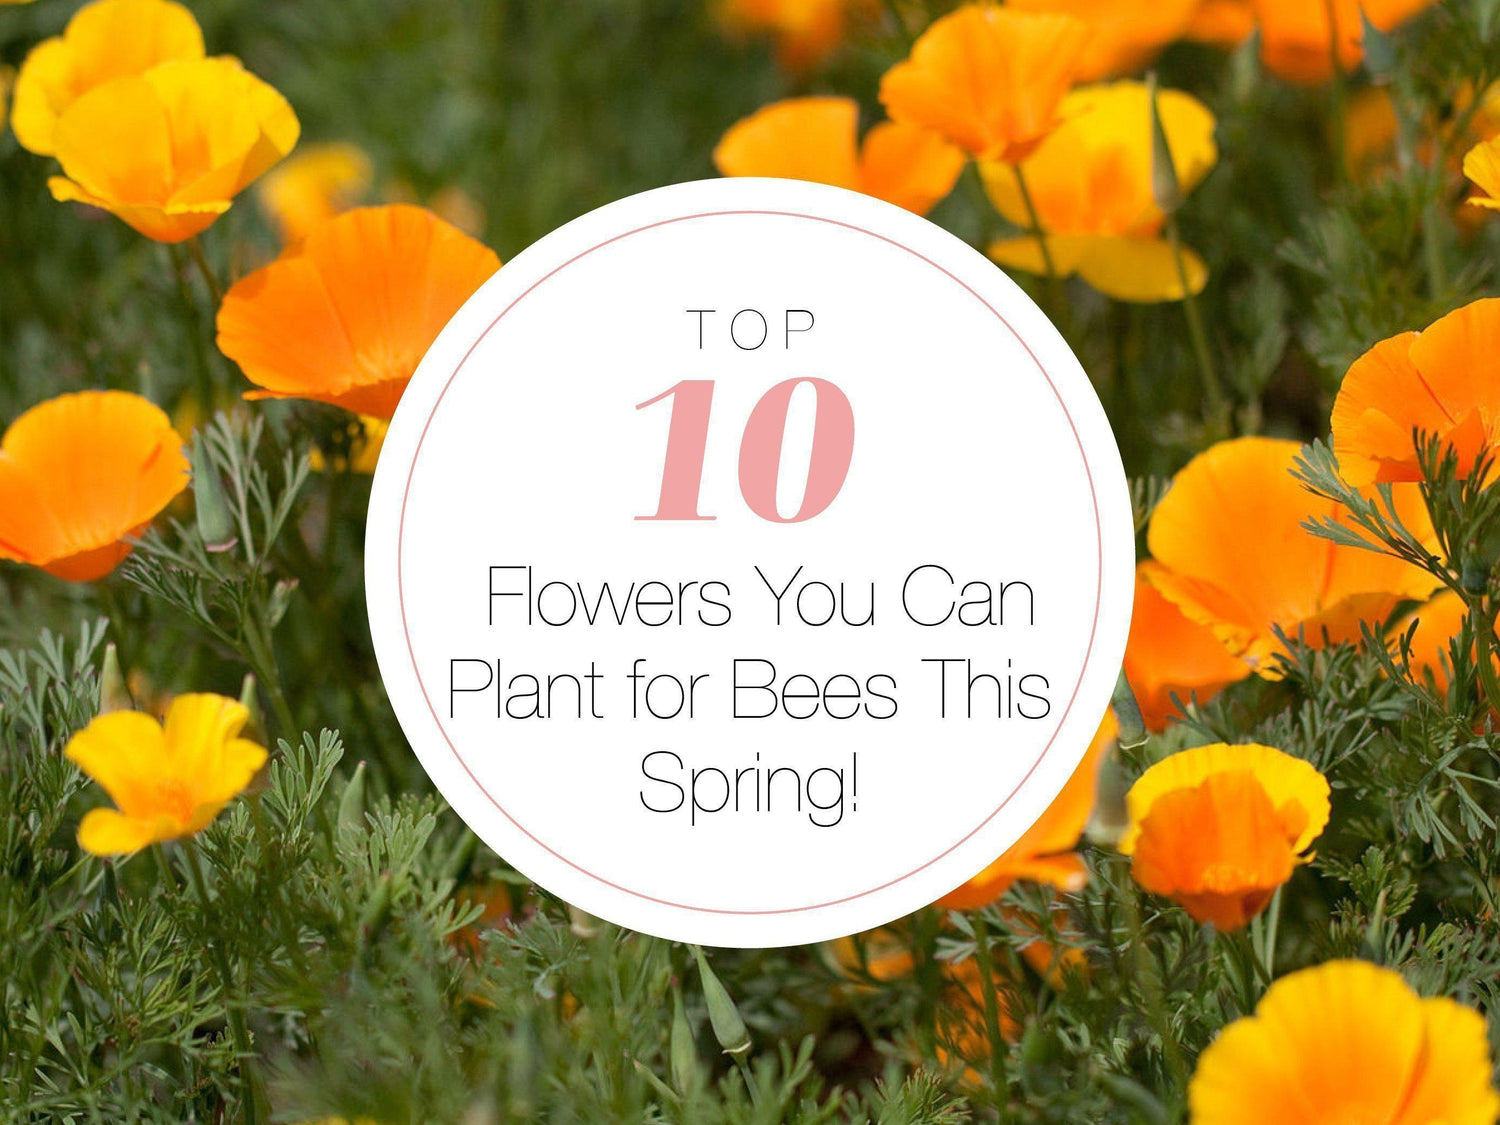 Top 10 Flowers You Can Plant for Bees This Spring!-Seattle Jewelry-Handmade Jewelry-Seattle Jeweler-Twyla Dill